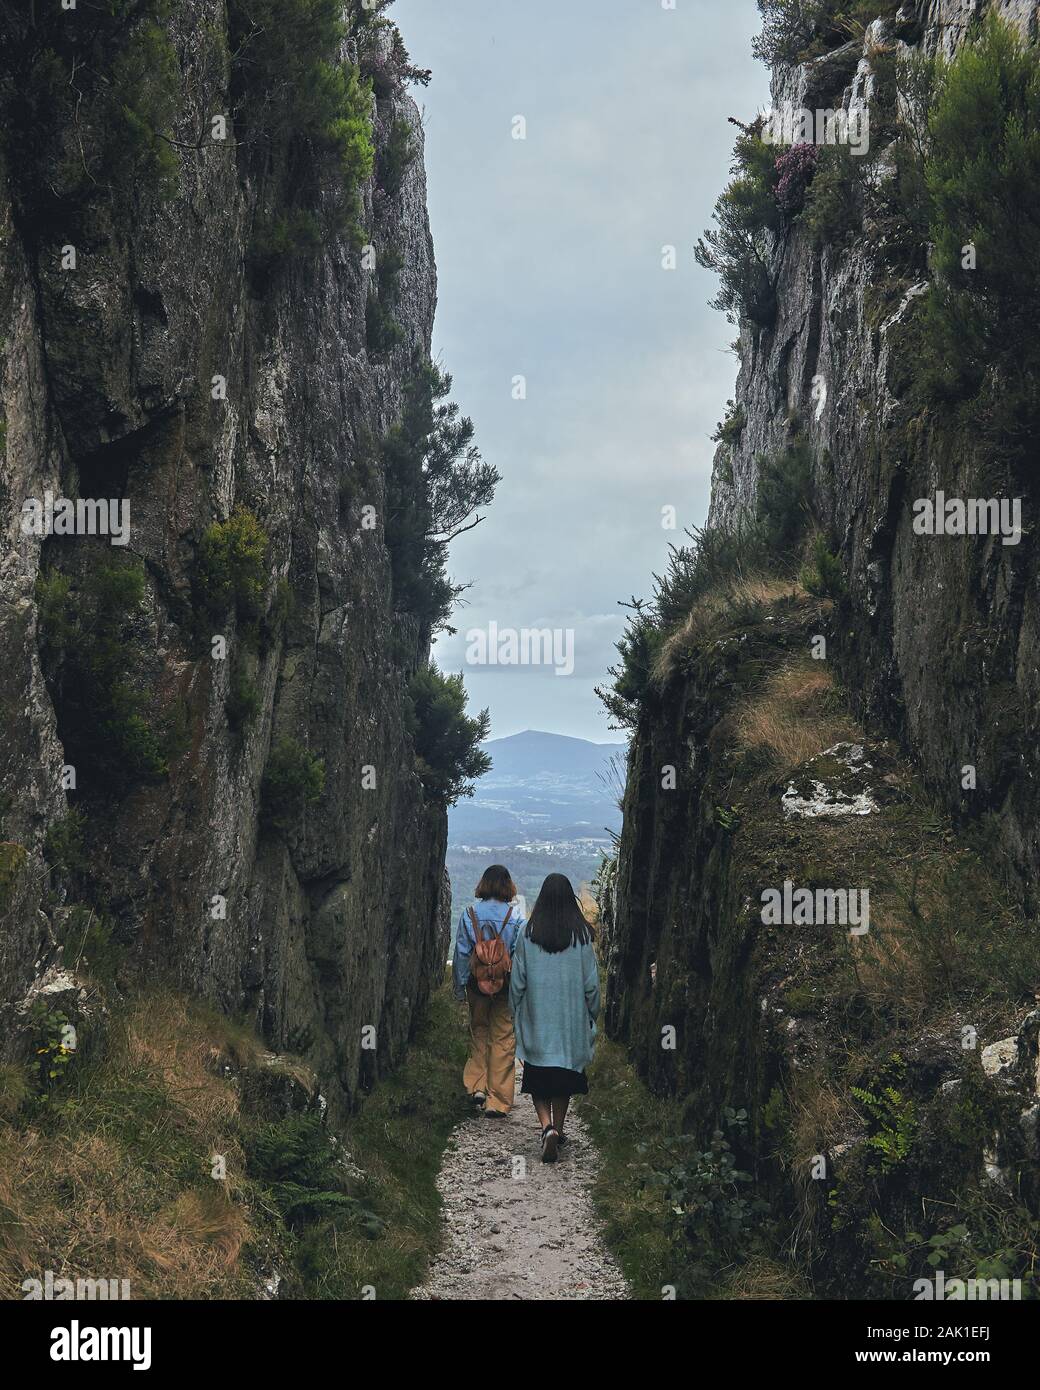 Two young women walking through a path between mountains cloudy day Stock Photo